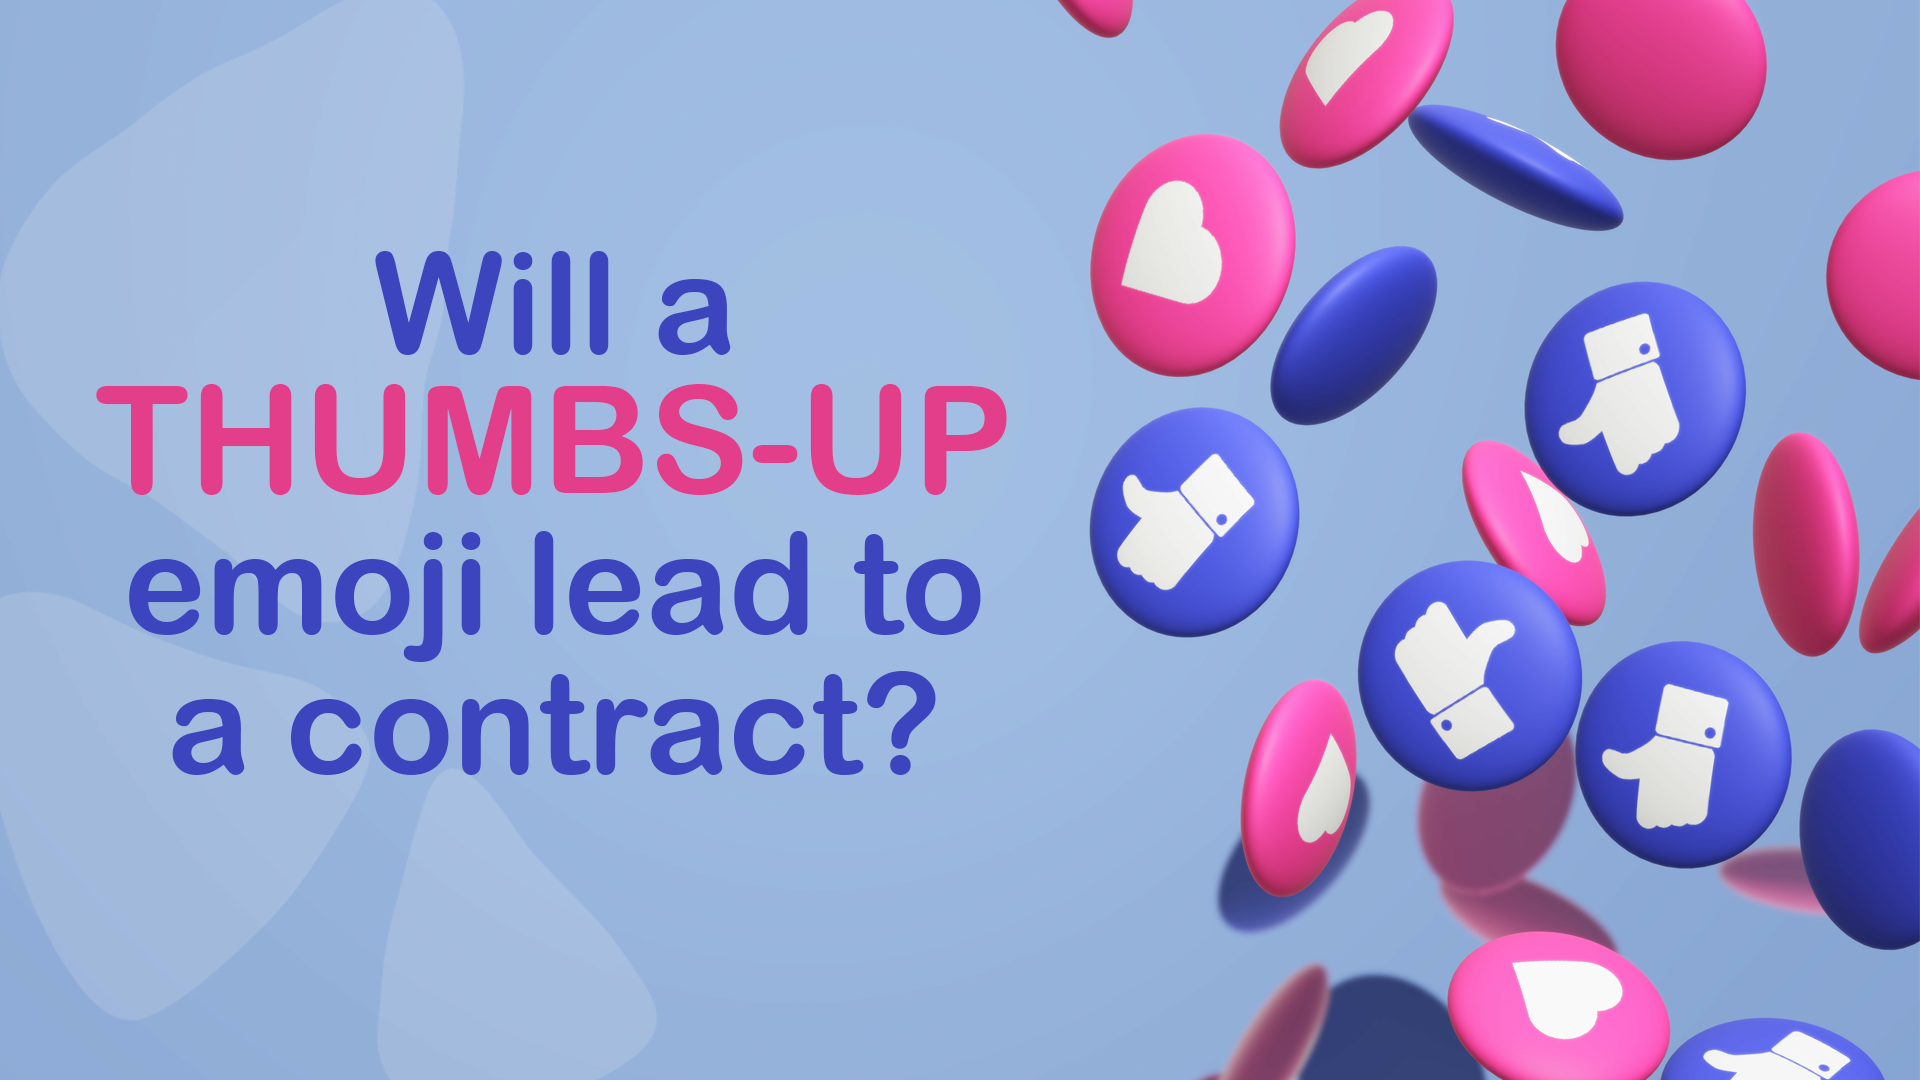 Will a thumbs-up emoji lead to a contract?